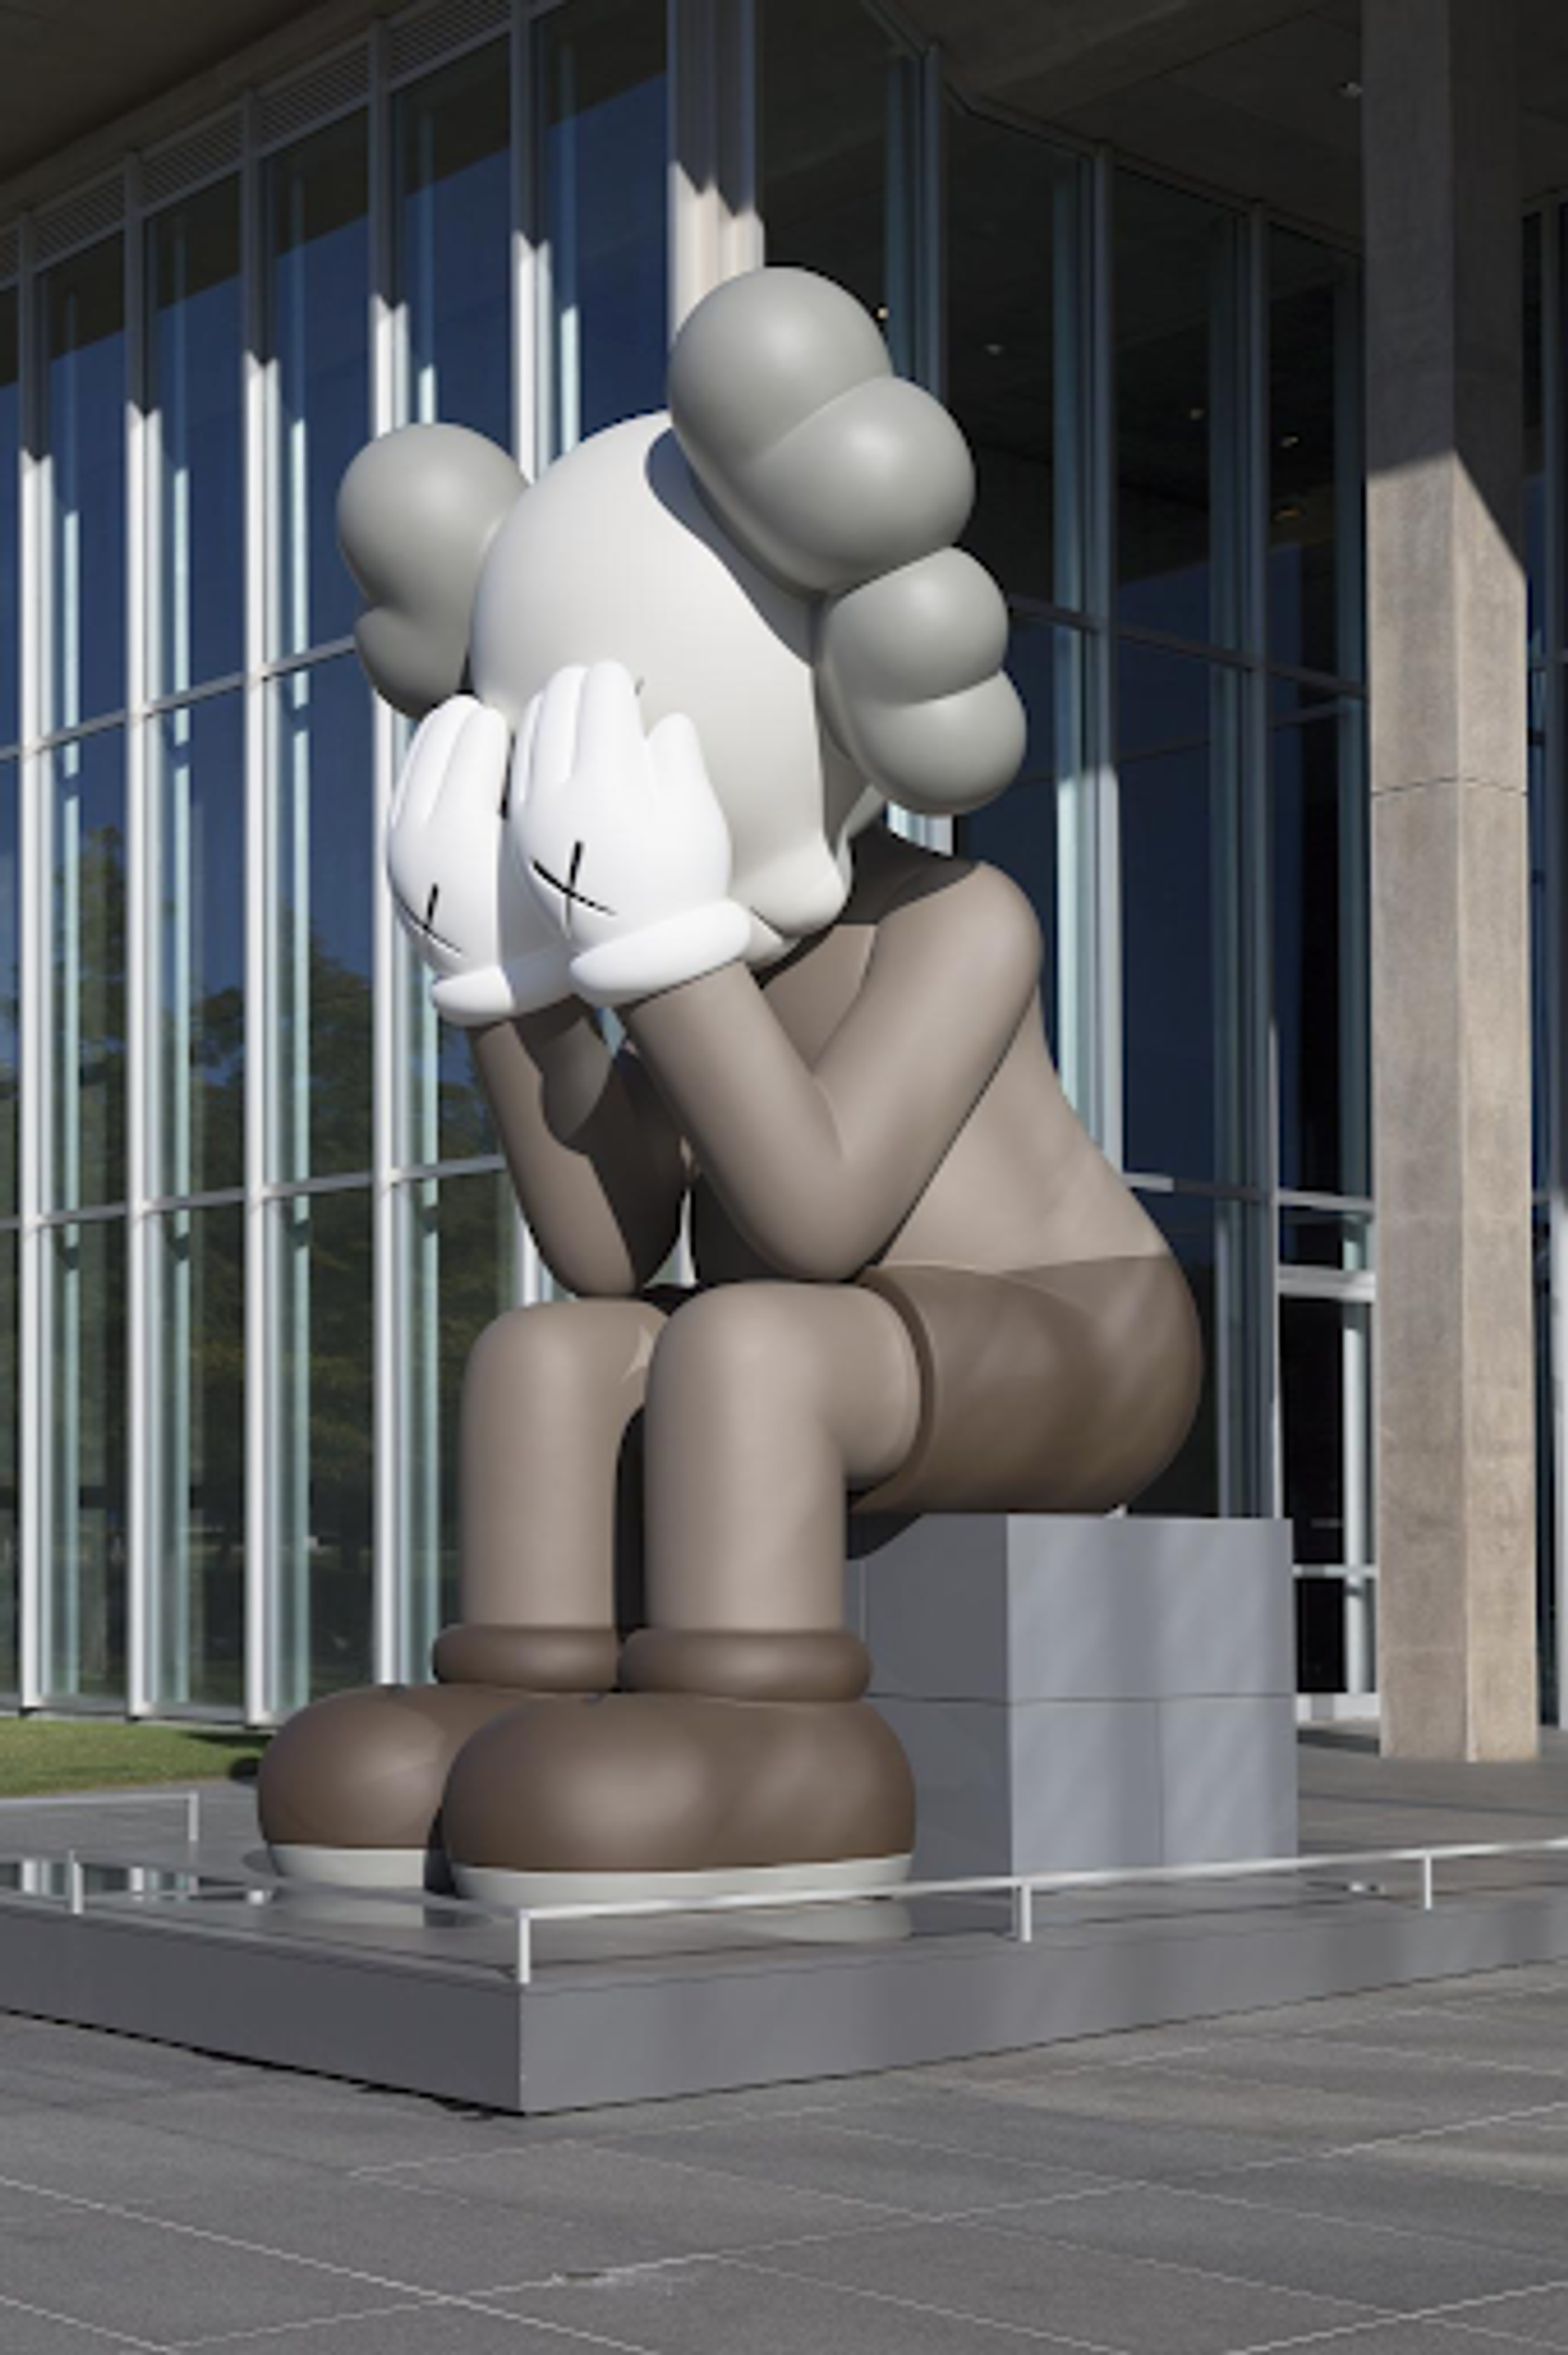 KAWS’ Companion (Passing Through) sculpture. Massive cartoon like character sitting with its elbows on its knees, and face buried into its palms